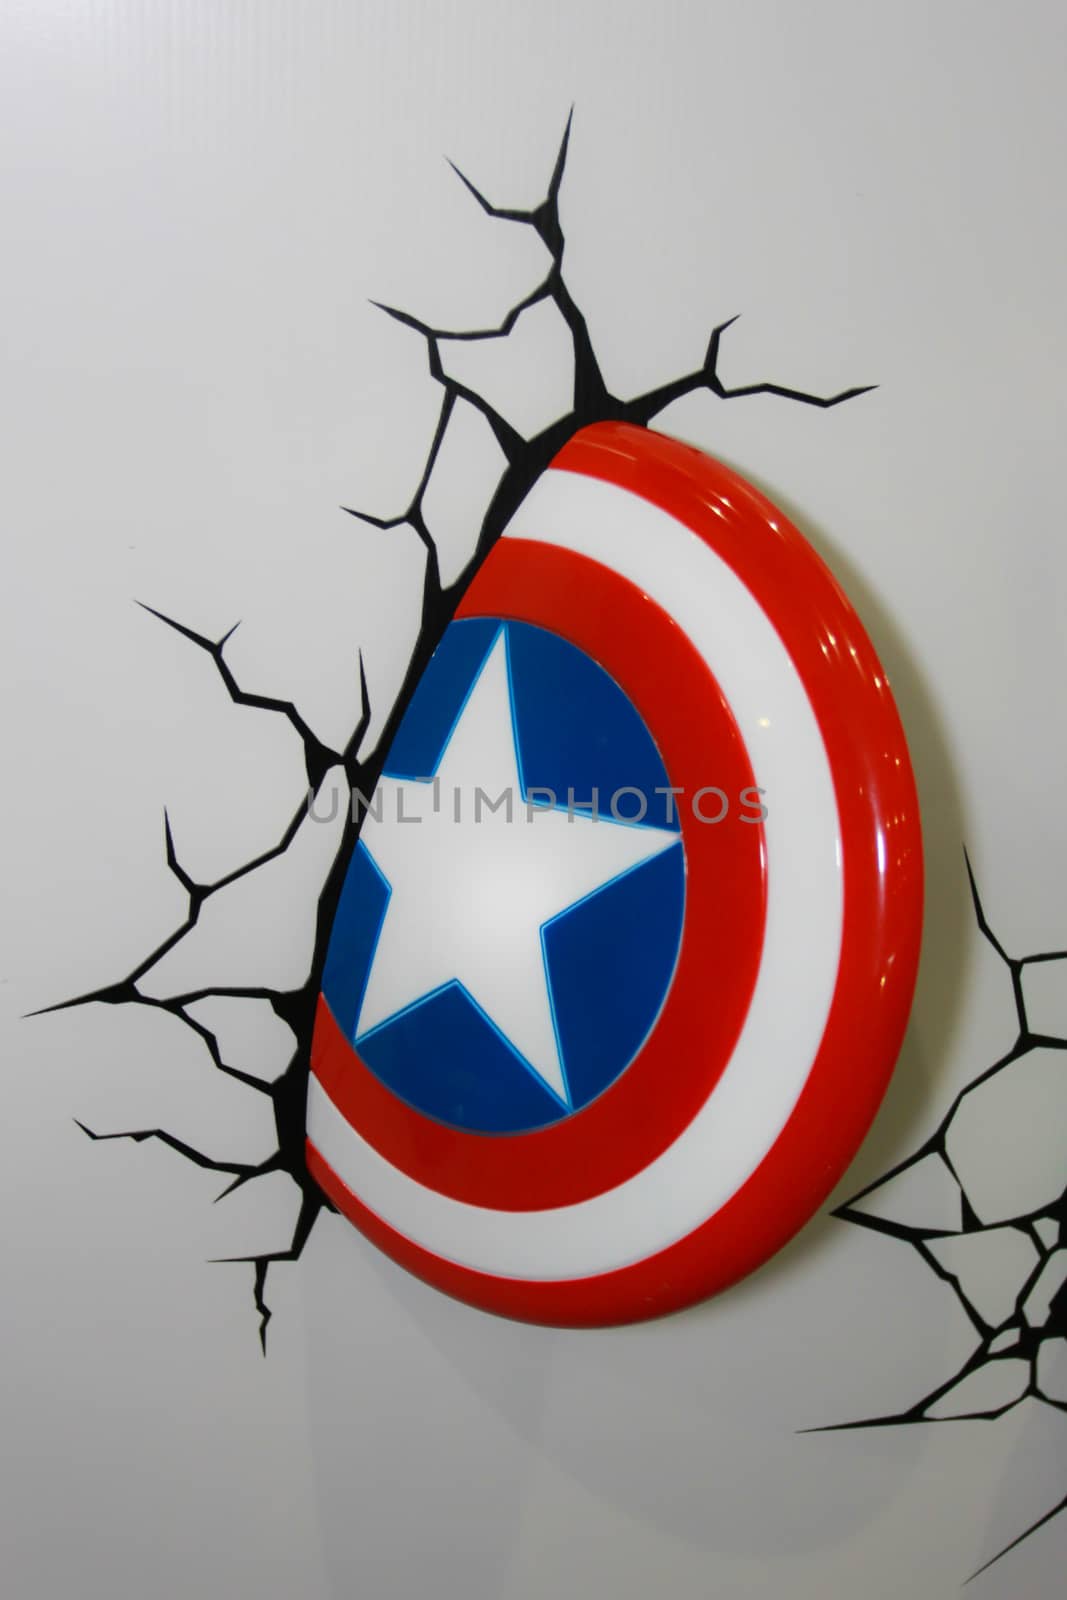 A model of the Captain America Shield from the movies and comics by redthirteen